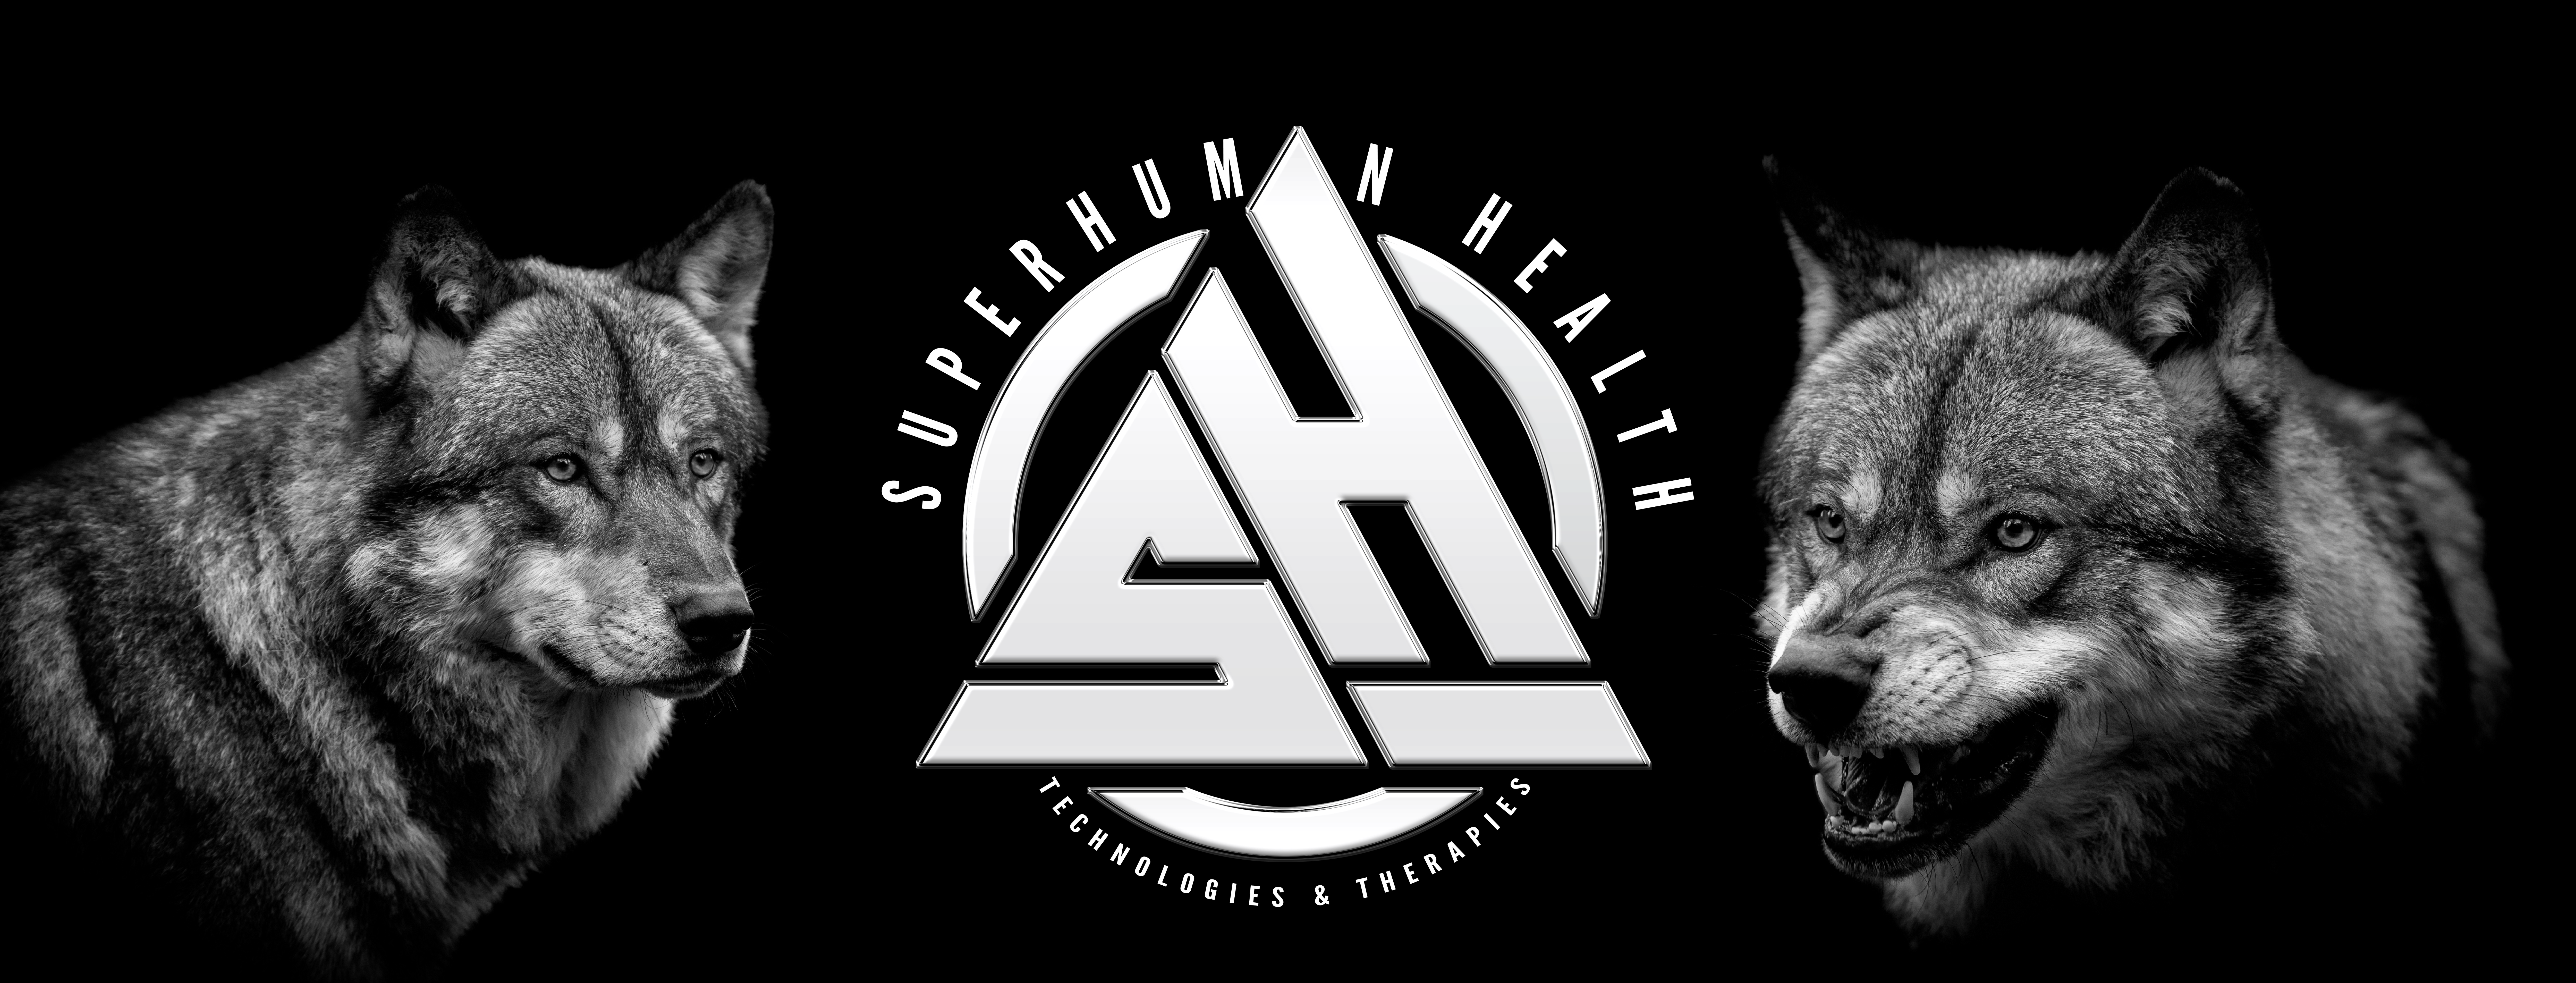 Two wolves with the Superhuman logo in the middle